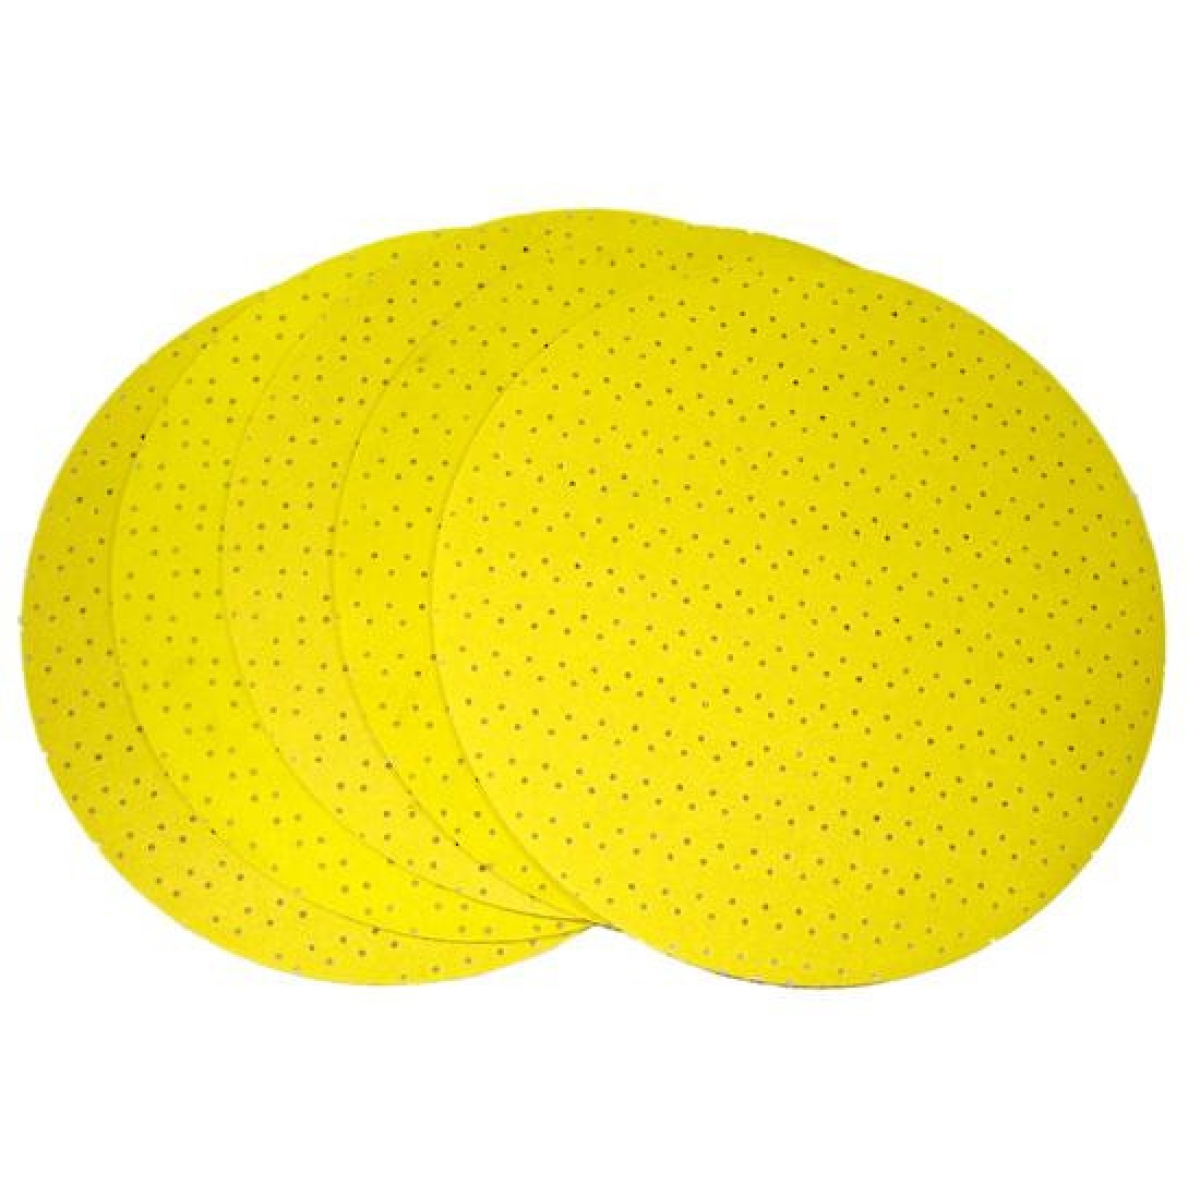 Intex Useit Yellow Sanding Disc Pads 225mm (Packets of 5 Discs)